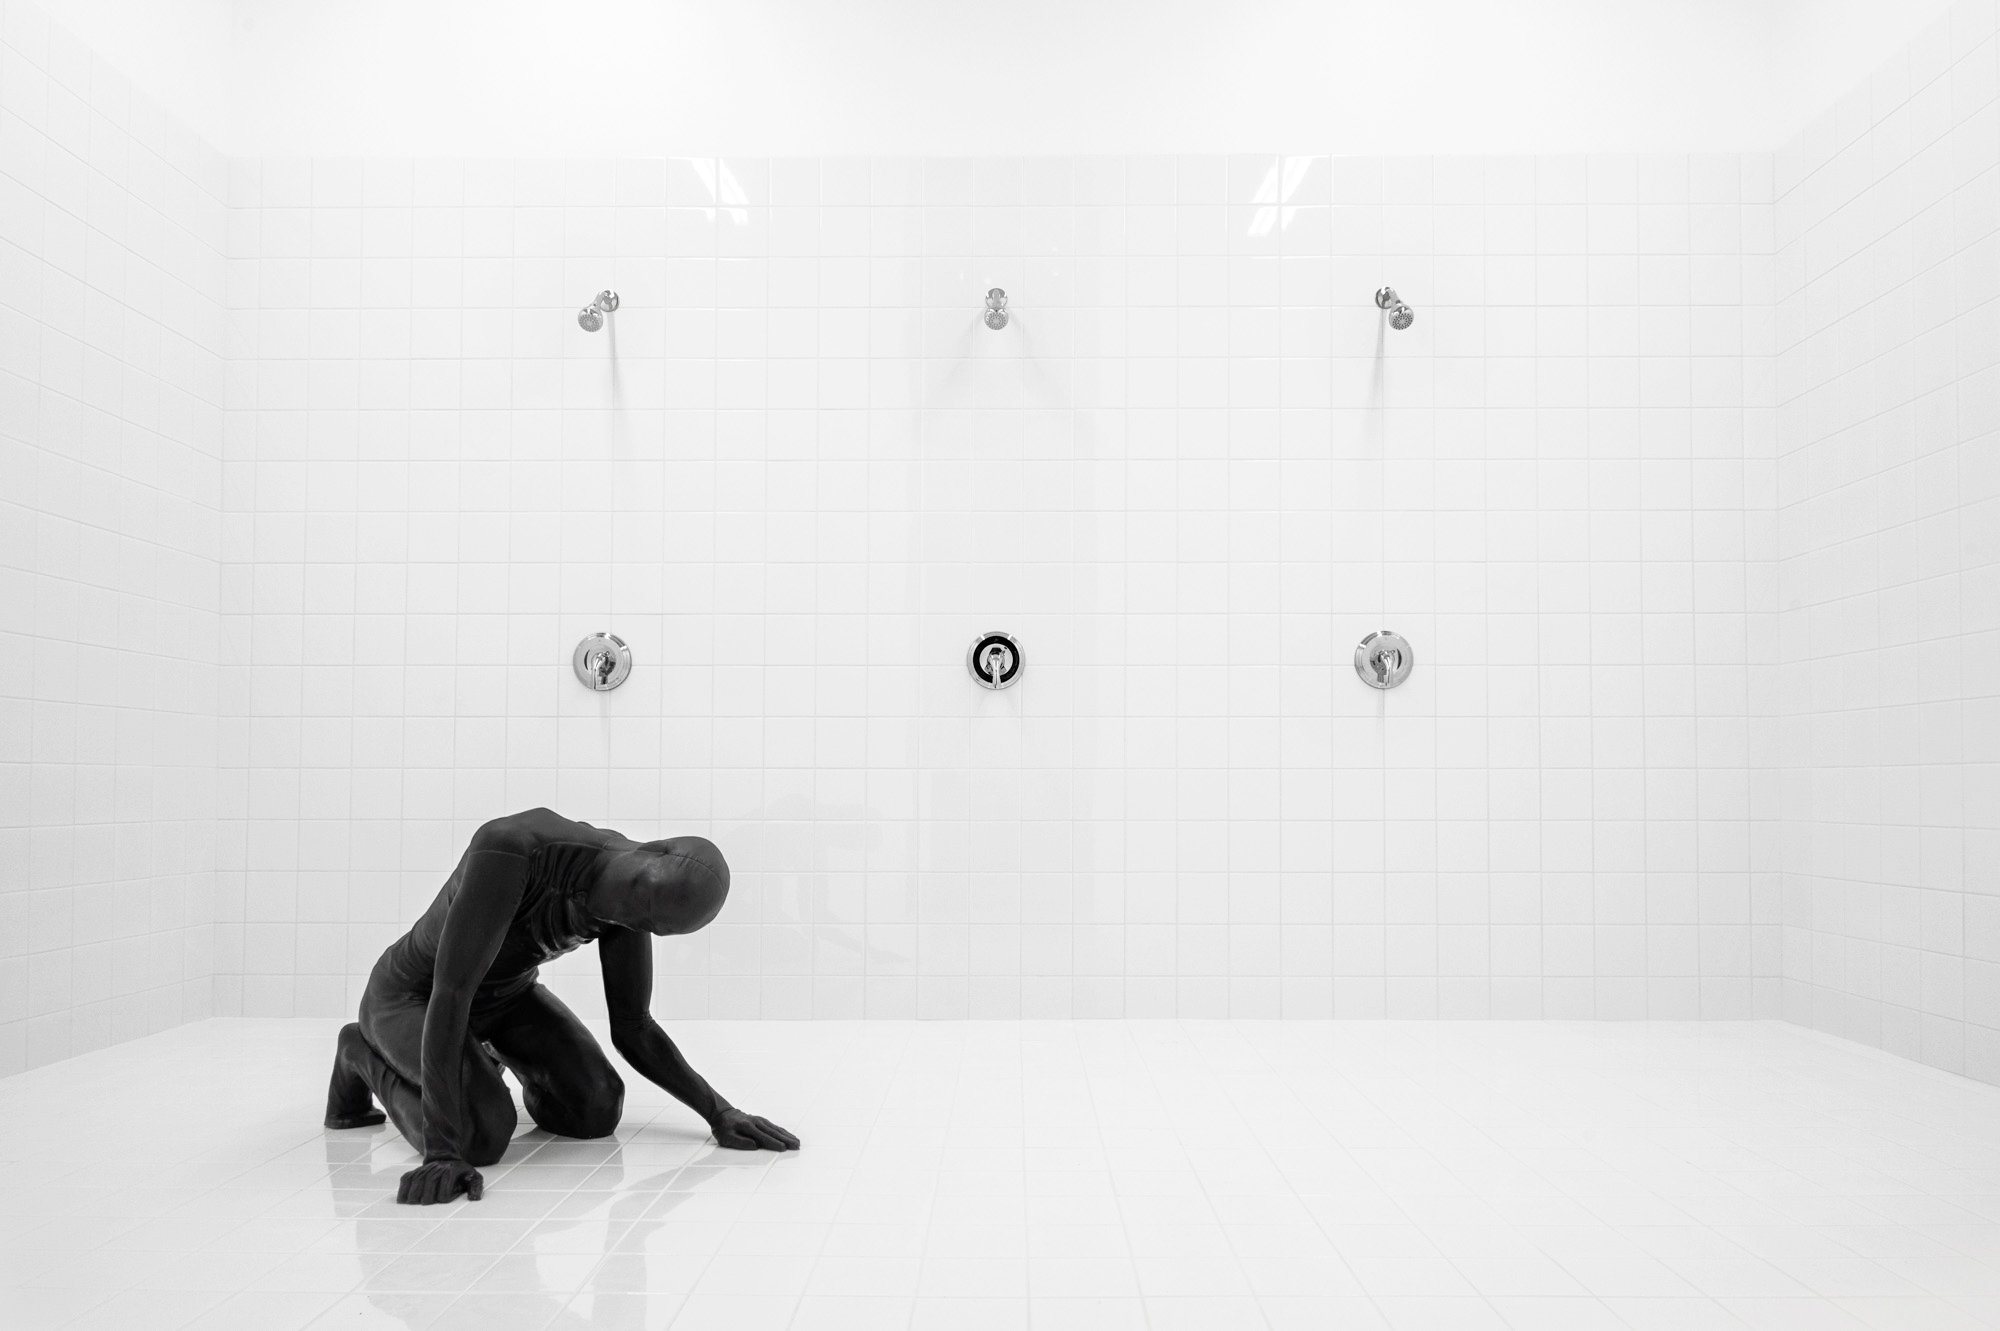   The Thing  (2022) silicon sculpture in tiled shower room 12’ x 16’ x 16’ (collaboration with Luis Jacob)  Installation view of  A Surrogate, A Proxy, A Stand-In  at Agnes Etherington Art Centre, Kingston, Canada 